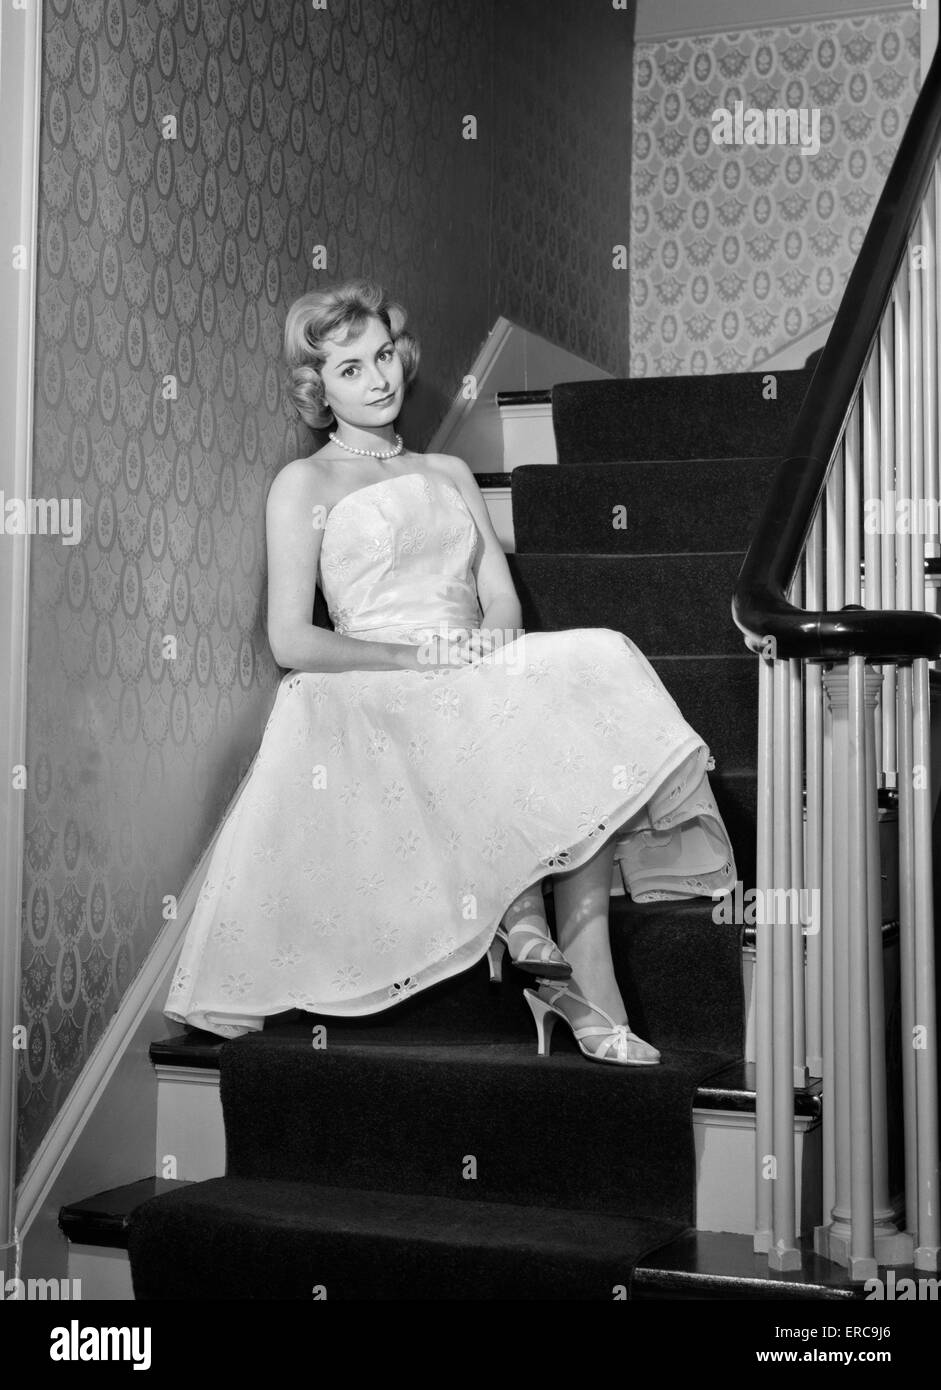 1950s 1960s WOMAN FORMAL COCKTAIL DRESS SITTING ON STAIRS LOOKING SAD WAITING FOR DATE STOOD UP Stock Photo